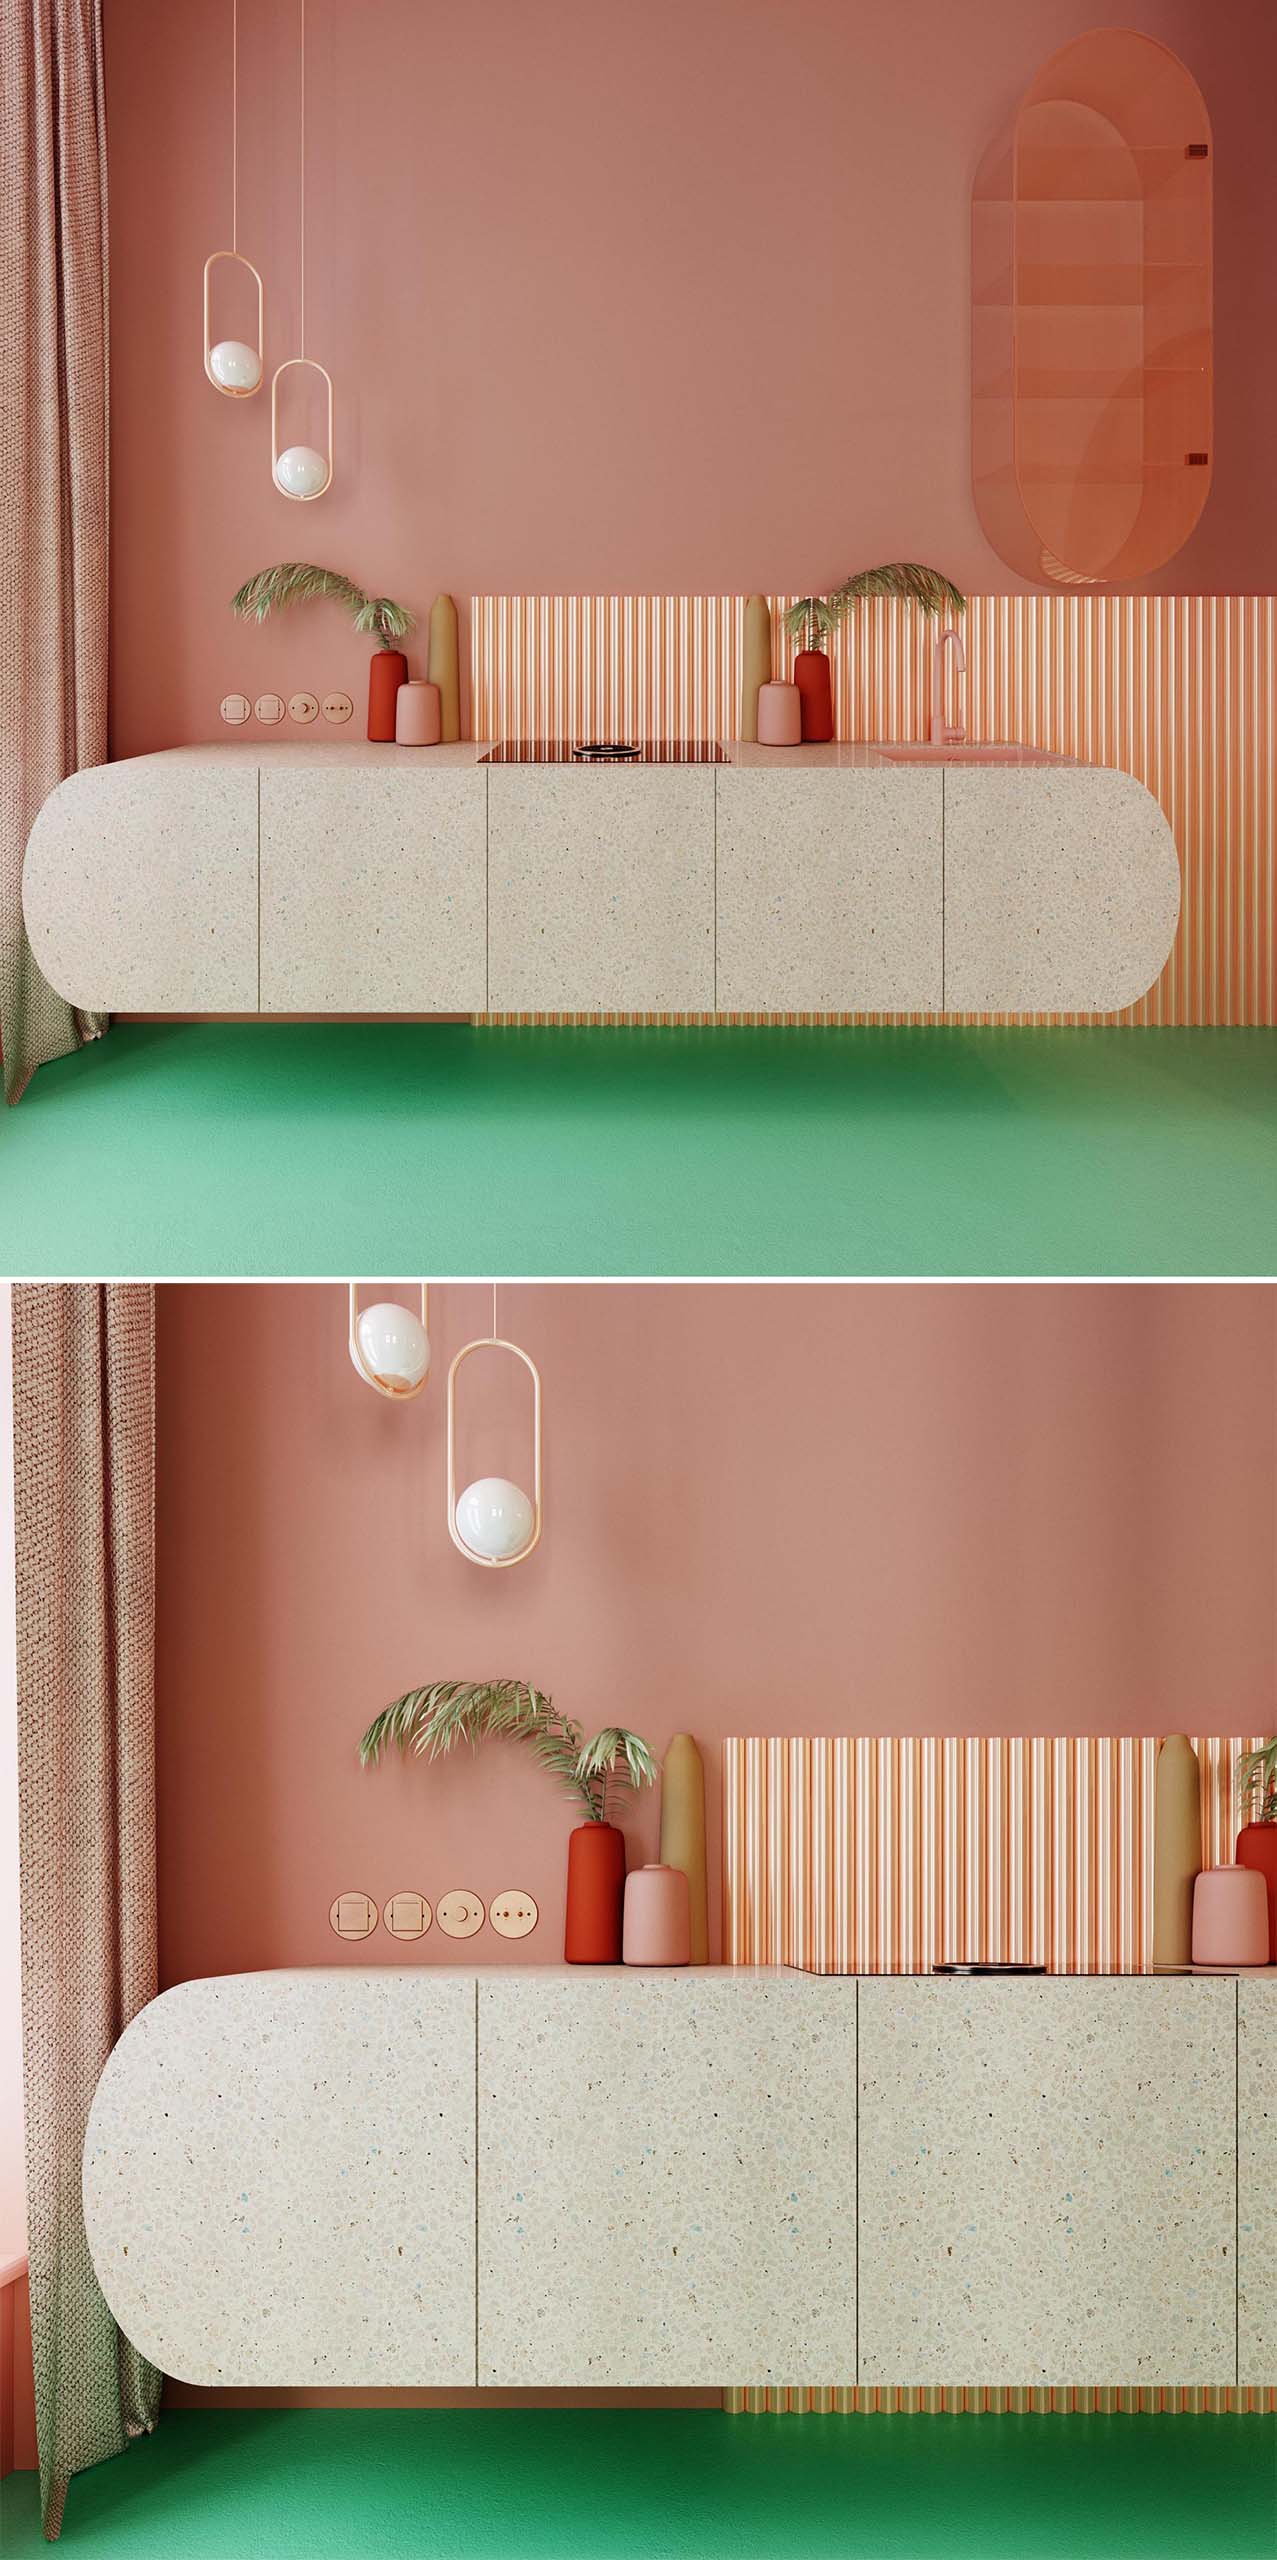 This pink and green kitchen includes materials such as terrazzo and plastic, and has floating cabinets. The metal backsplash, which is coated with copper, protects the wall and acts as a decorative function.